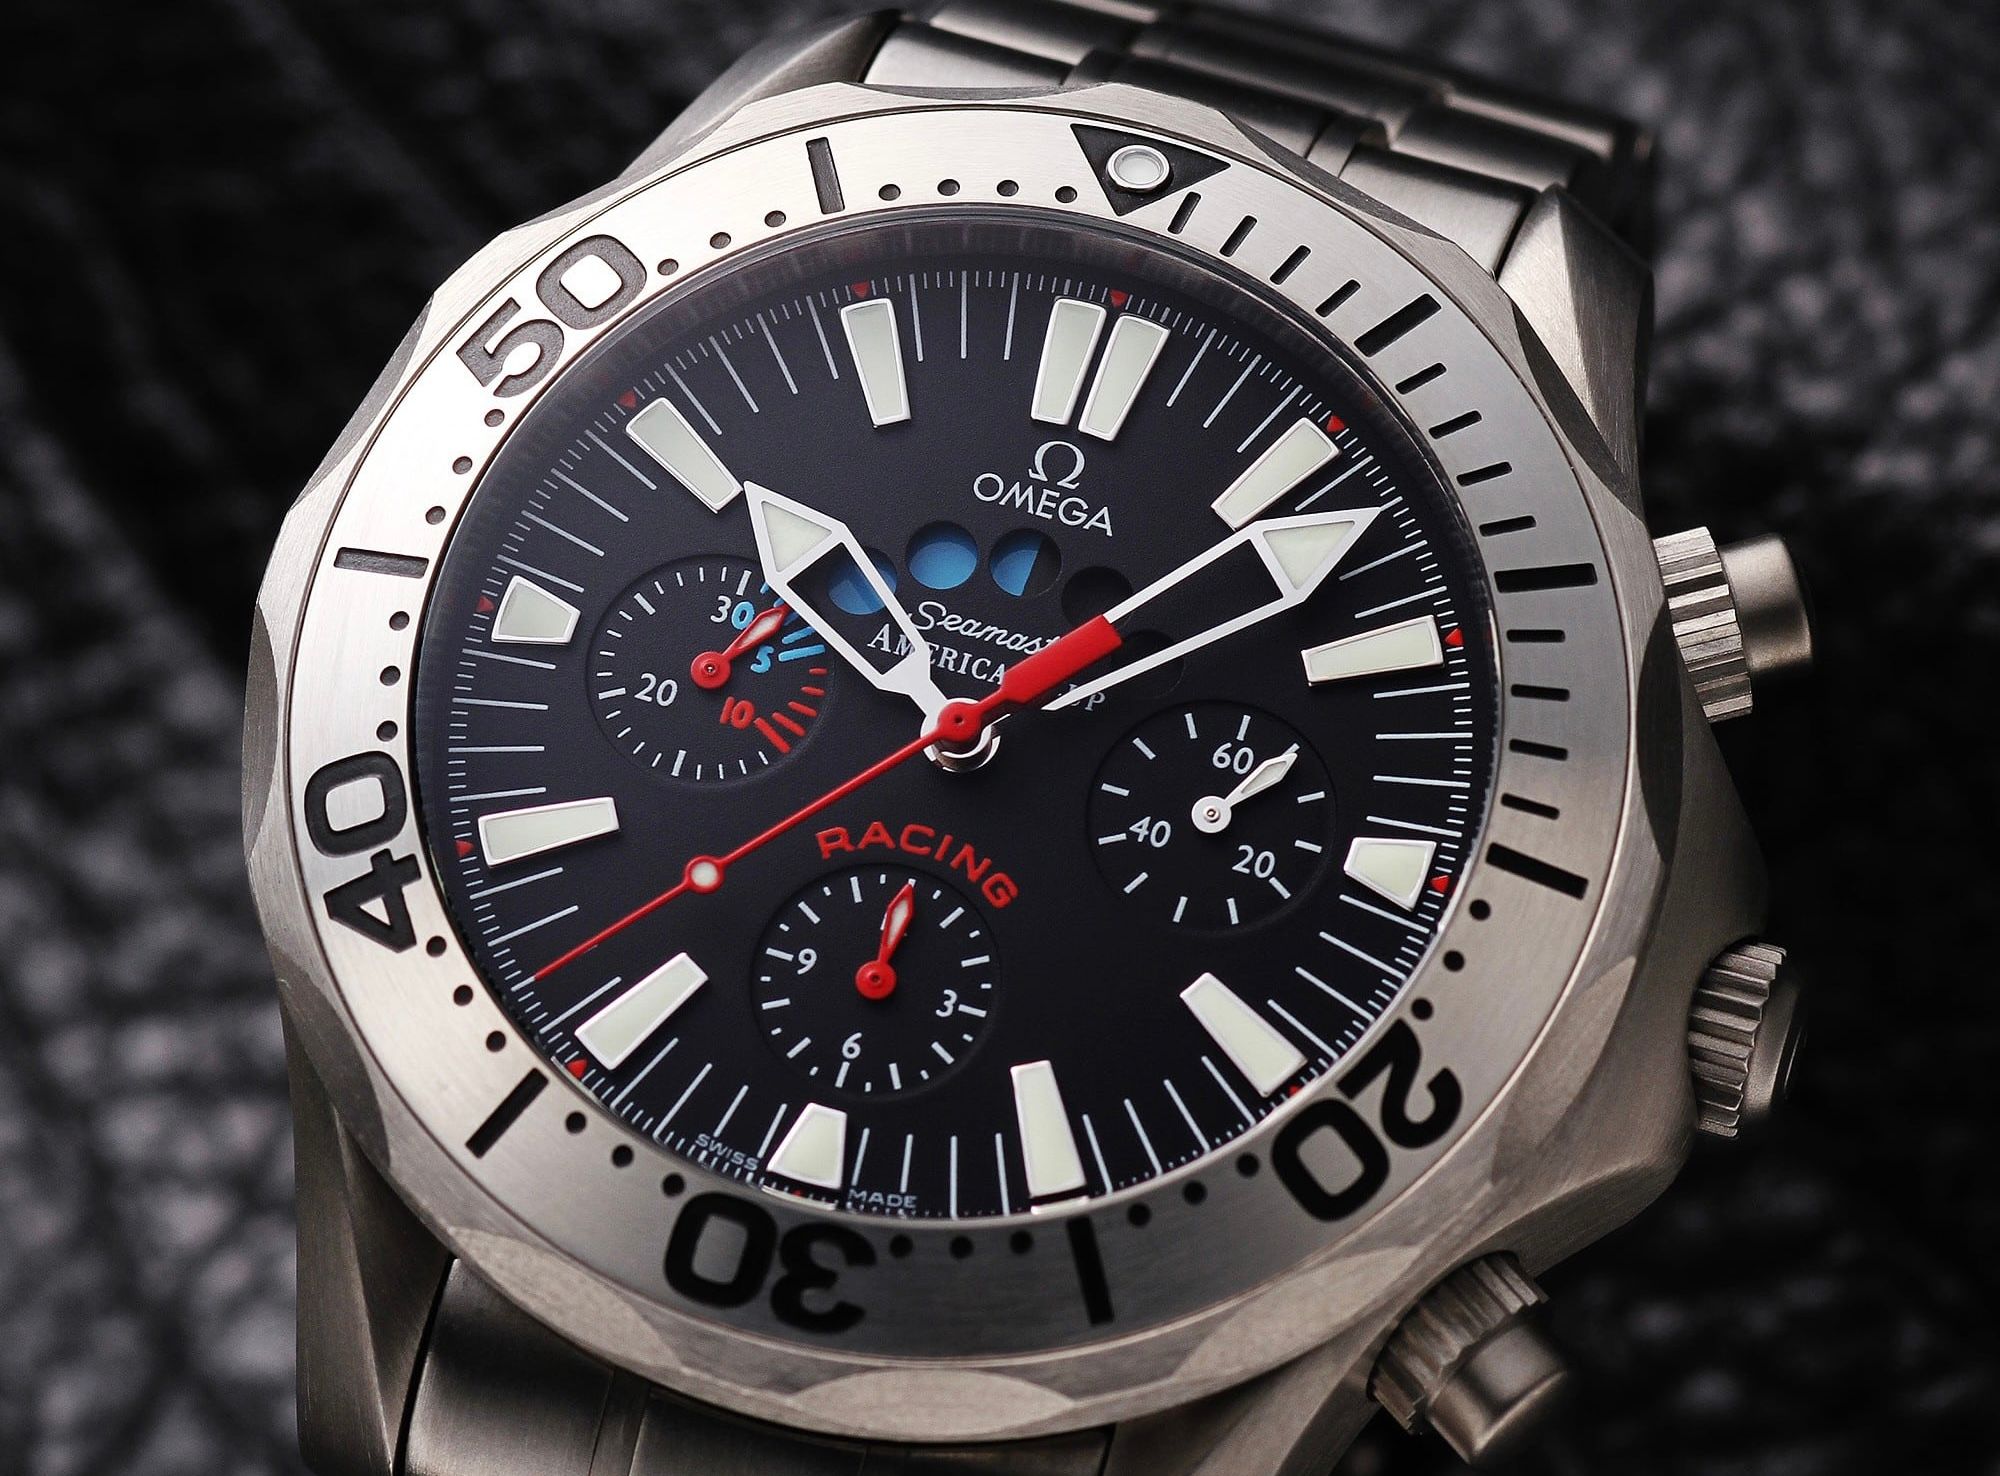 PAPERS Omega Seamaster America's Cup Racing Chronograph 2569.50.00 Steel  44mm Watch